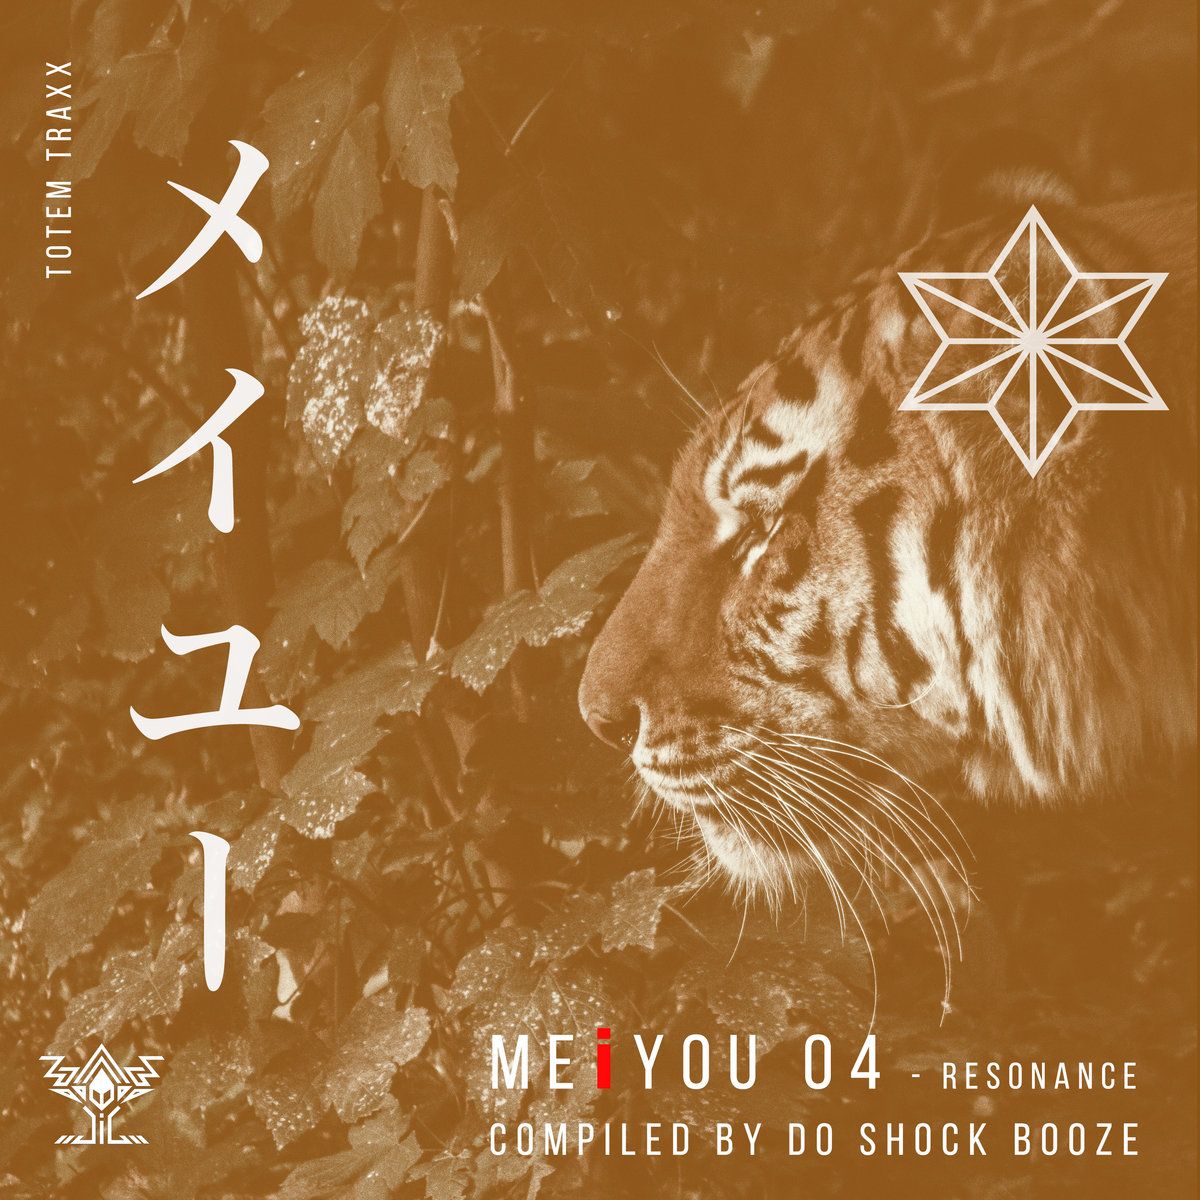 MEiYOU 04 resonance - COMPILED BY DO SHOCK BOOZE